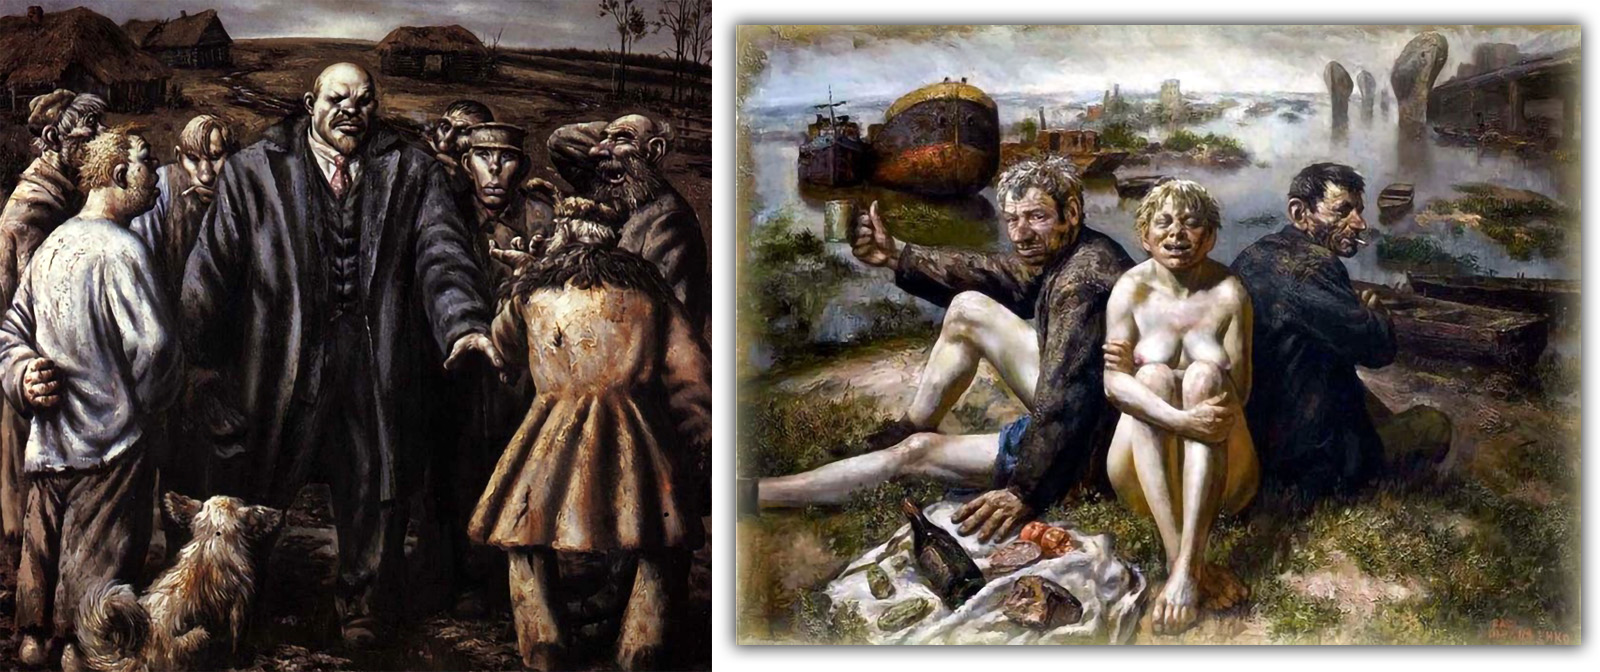 Village alcoholics in scandalous paintings by Vasily Shulzhenko, whose work leaves no one indifferent.